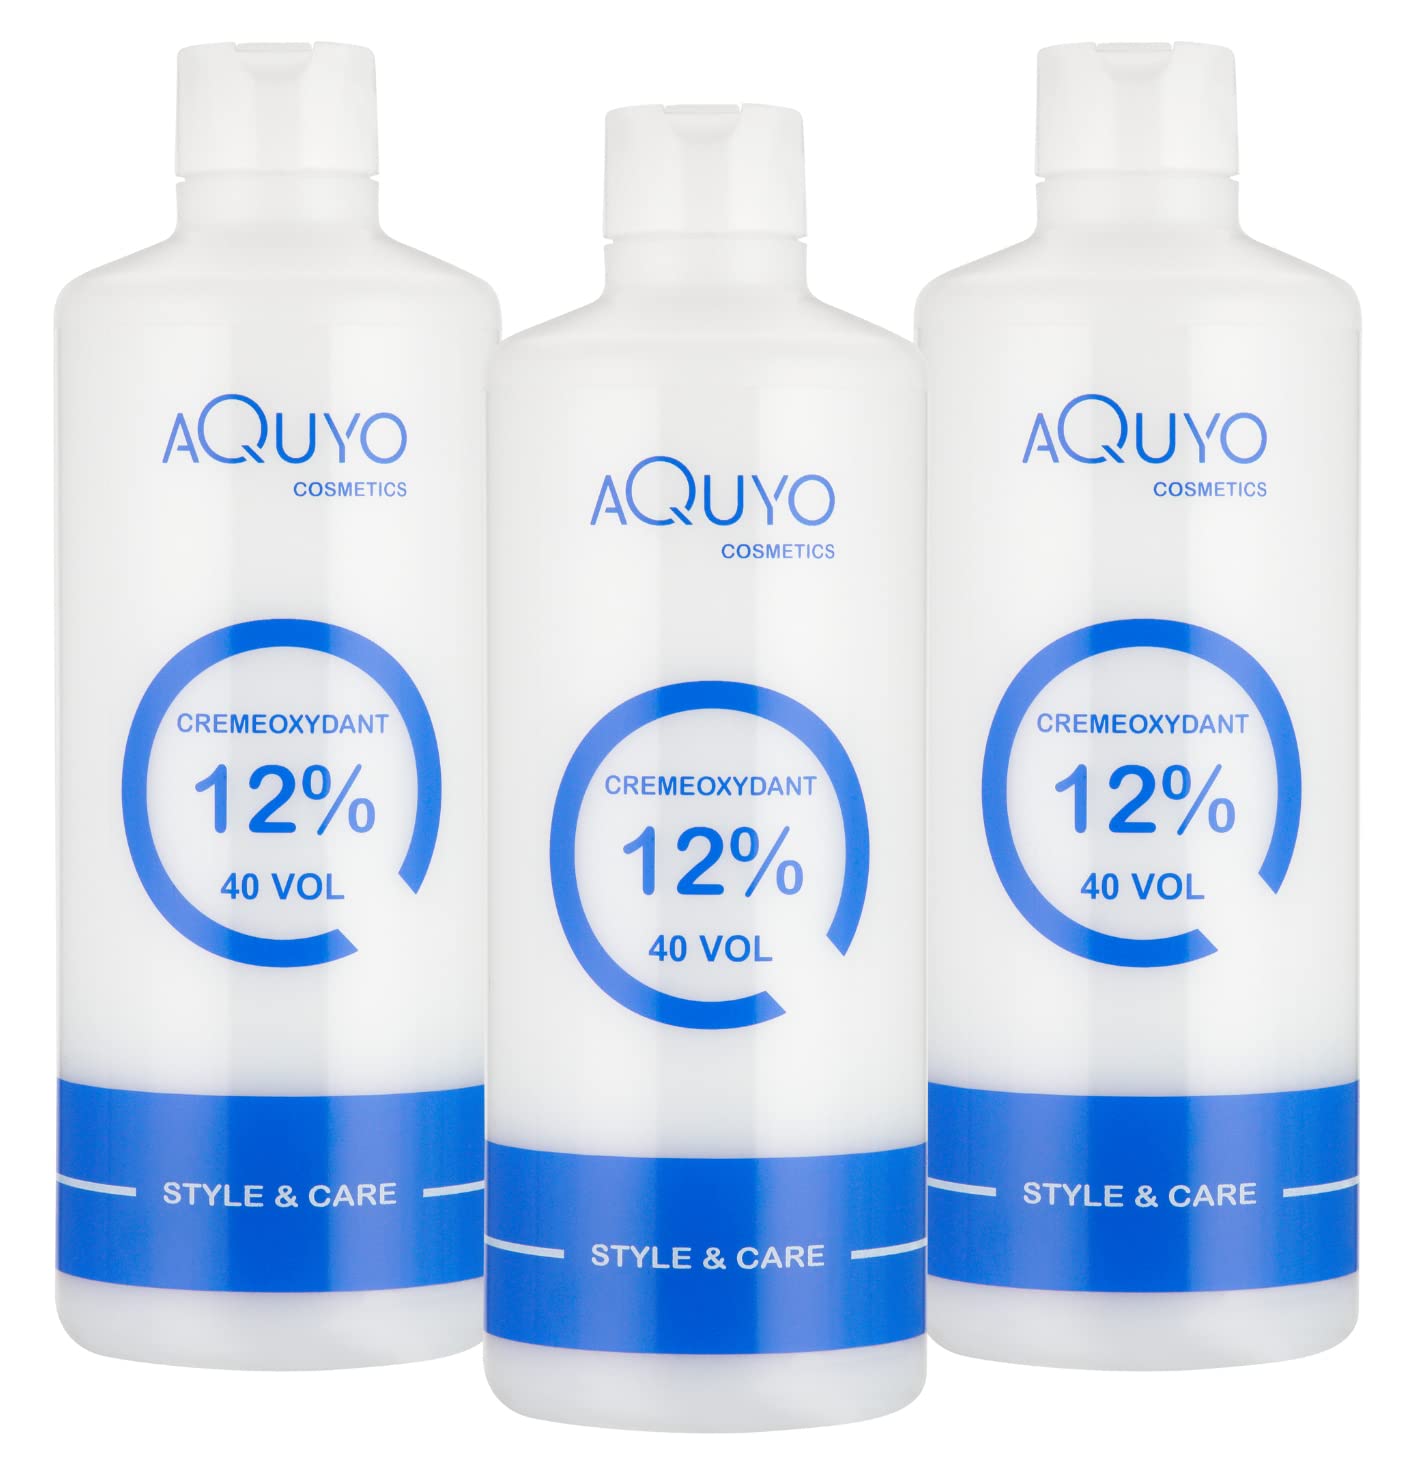 AQUYO Creme Oxydant Developer 12% 500 ml (40 Volumes) for Hair Colouring, Hair Dye or Bleaching (Pack of 3) | Oxidation Cream with Hydrogen Peroxide H2O2 | Oxidant is Free from Fragrances